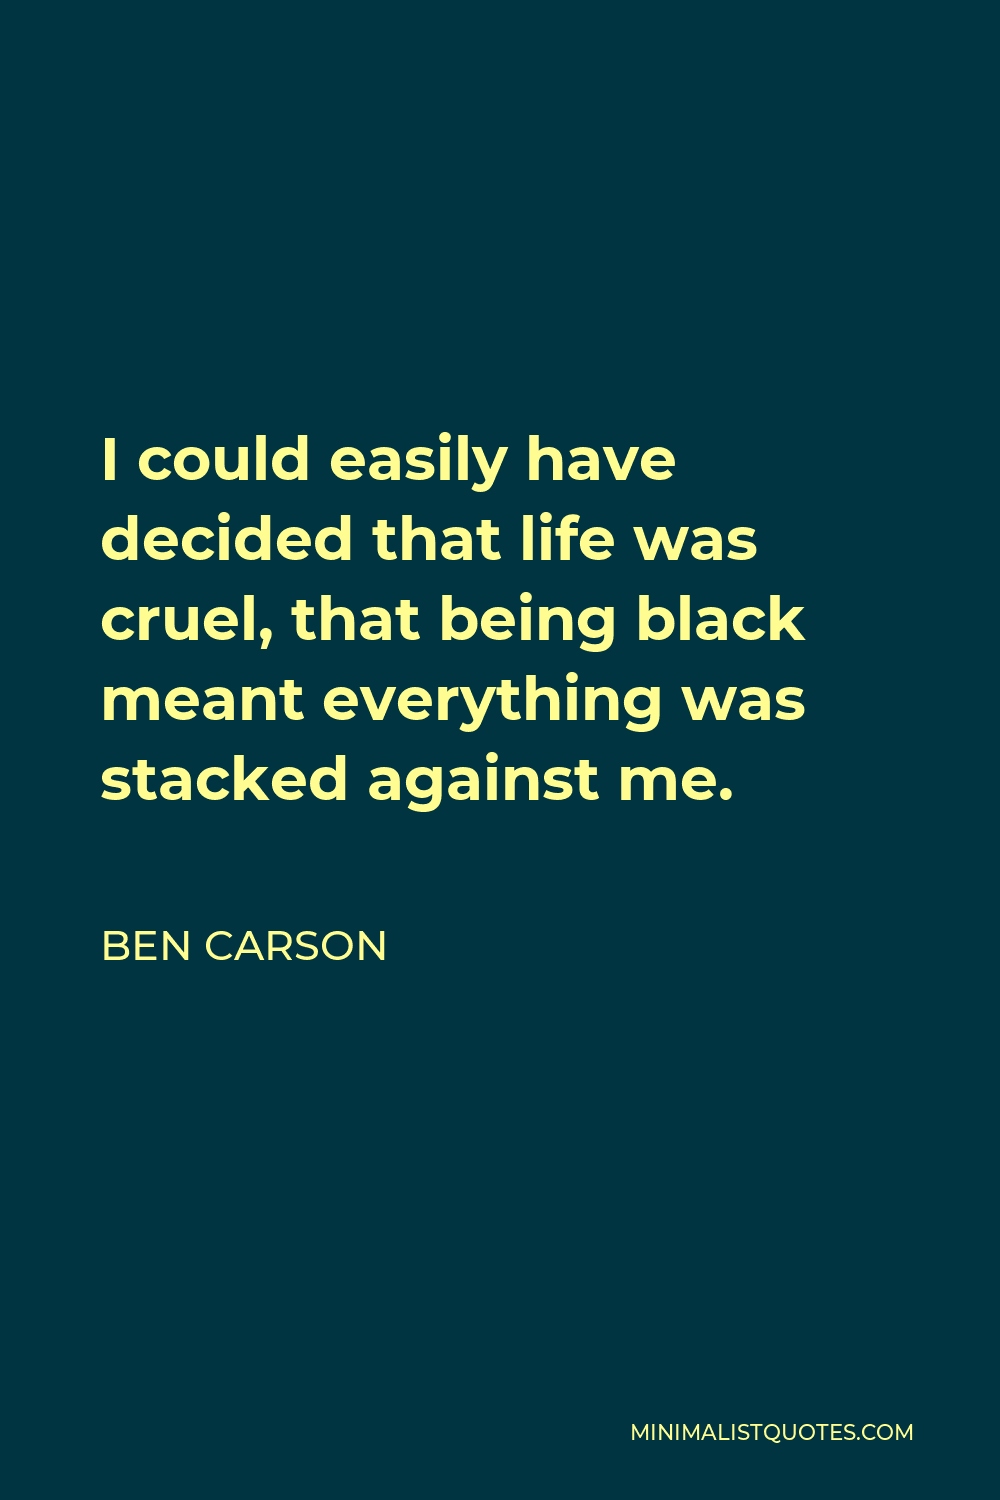 Ben Carson Quote - I could easily have decided that life was cruel, that being black meant everything was stacked against me.